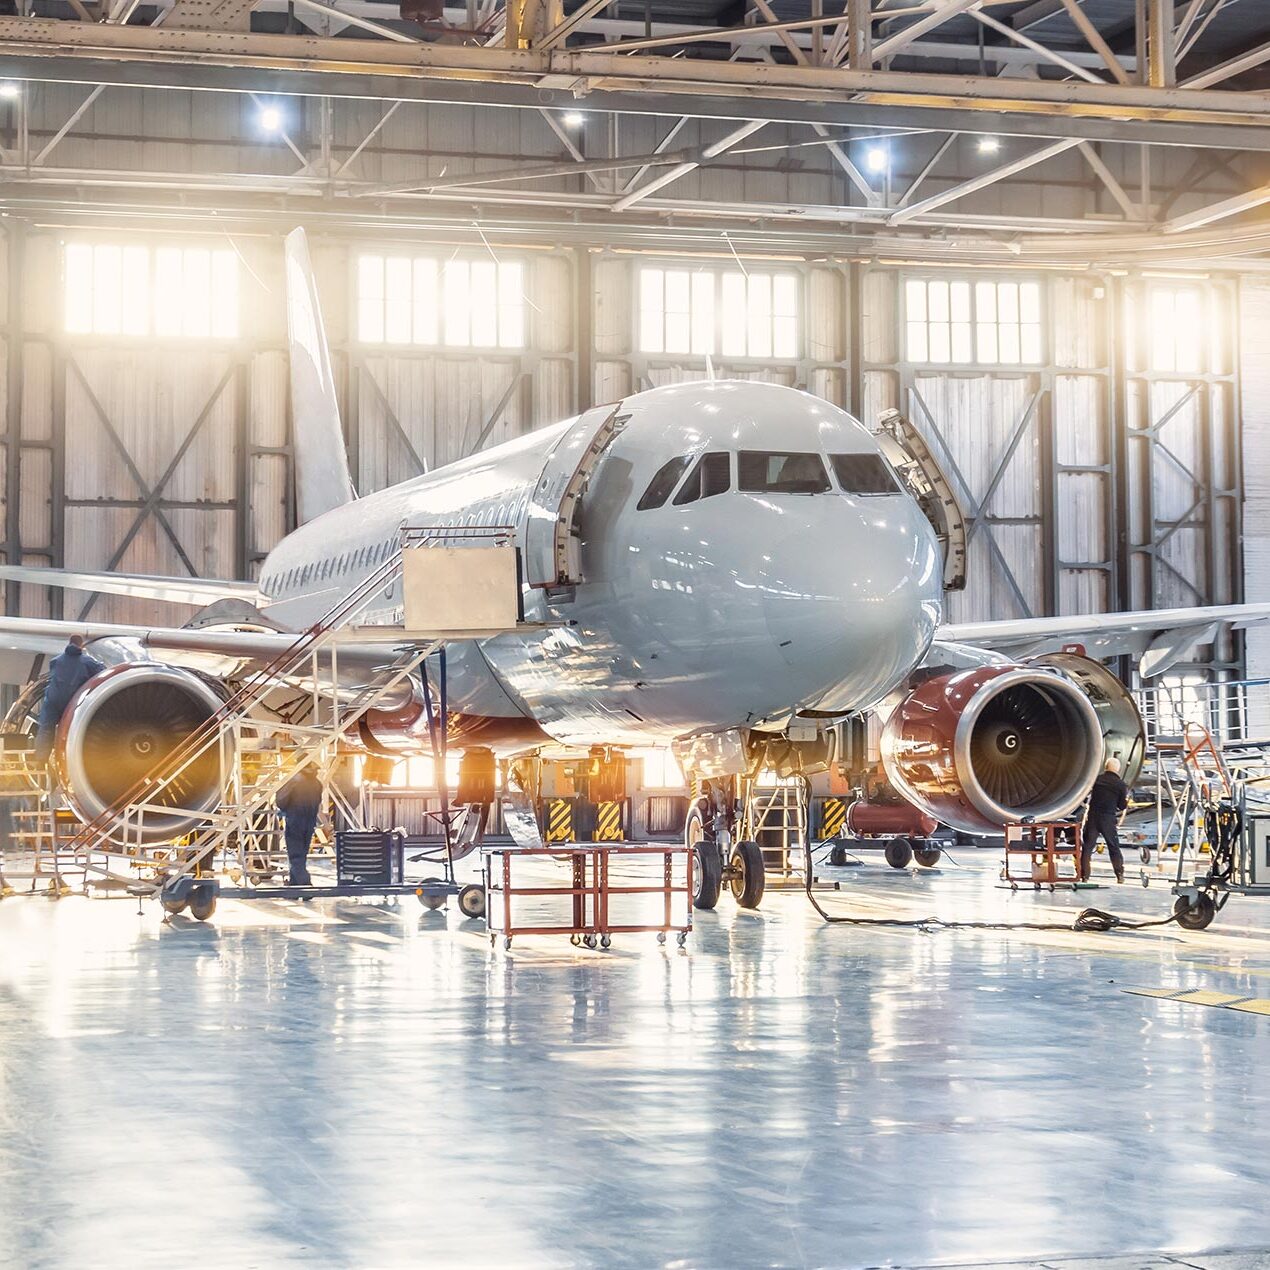 Serving the Needs of Aerospace Manufacturers